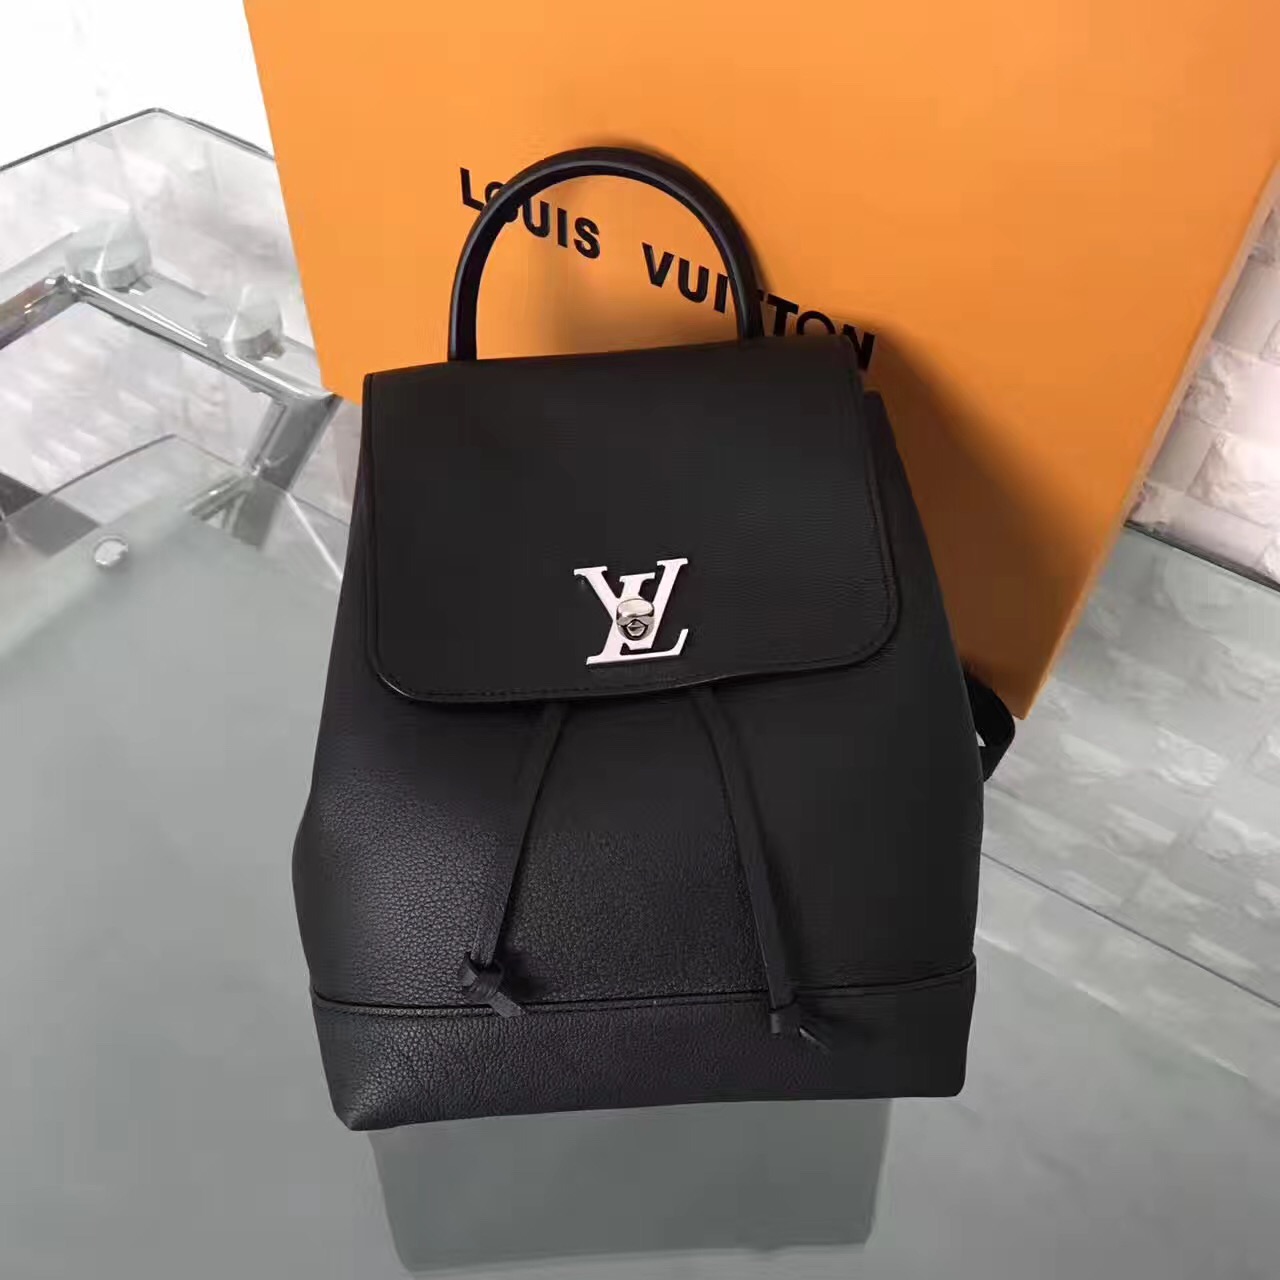 LV Louis Vuitton backpack small leather black handbags